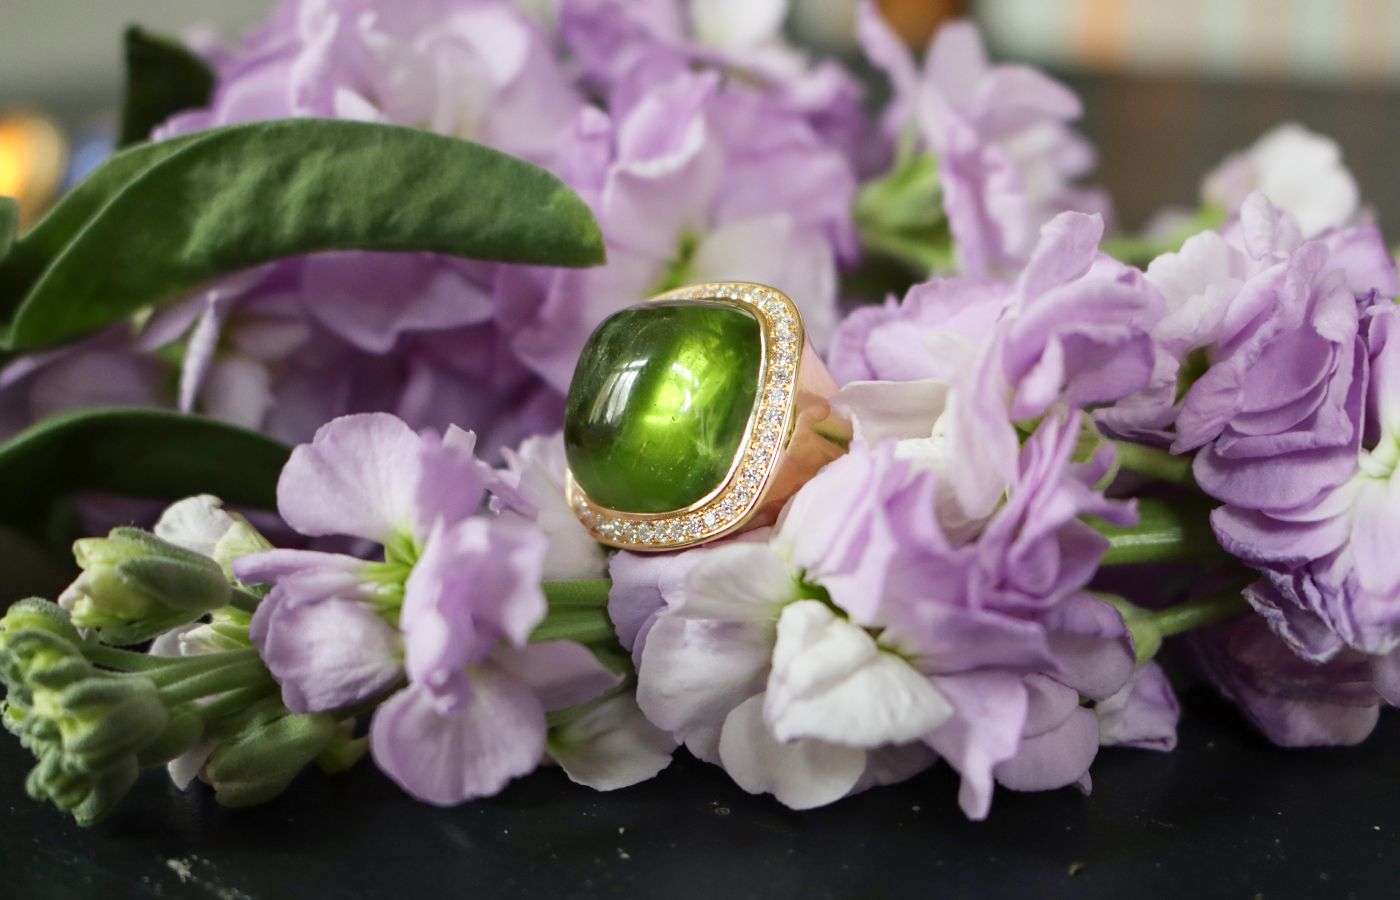 Charlotte Reedtz Jewellery Magic Wish ring in 18k yellow gold with a peridot cabochon and diamond halo